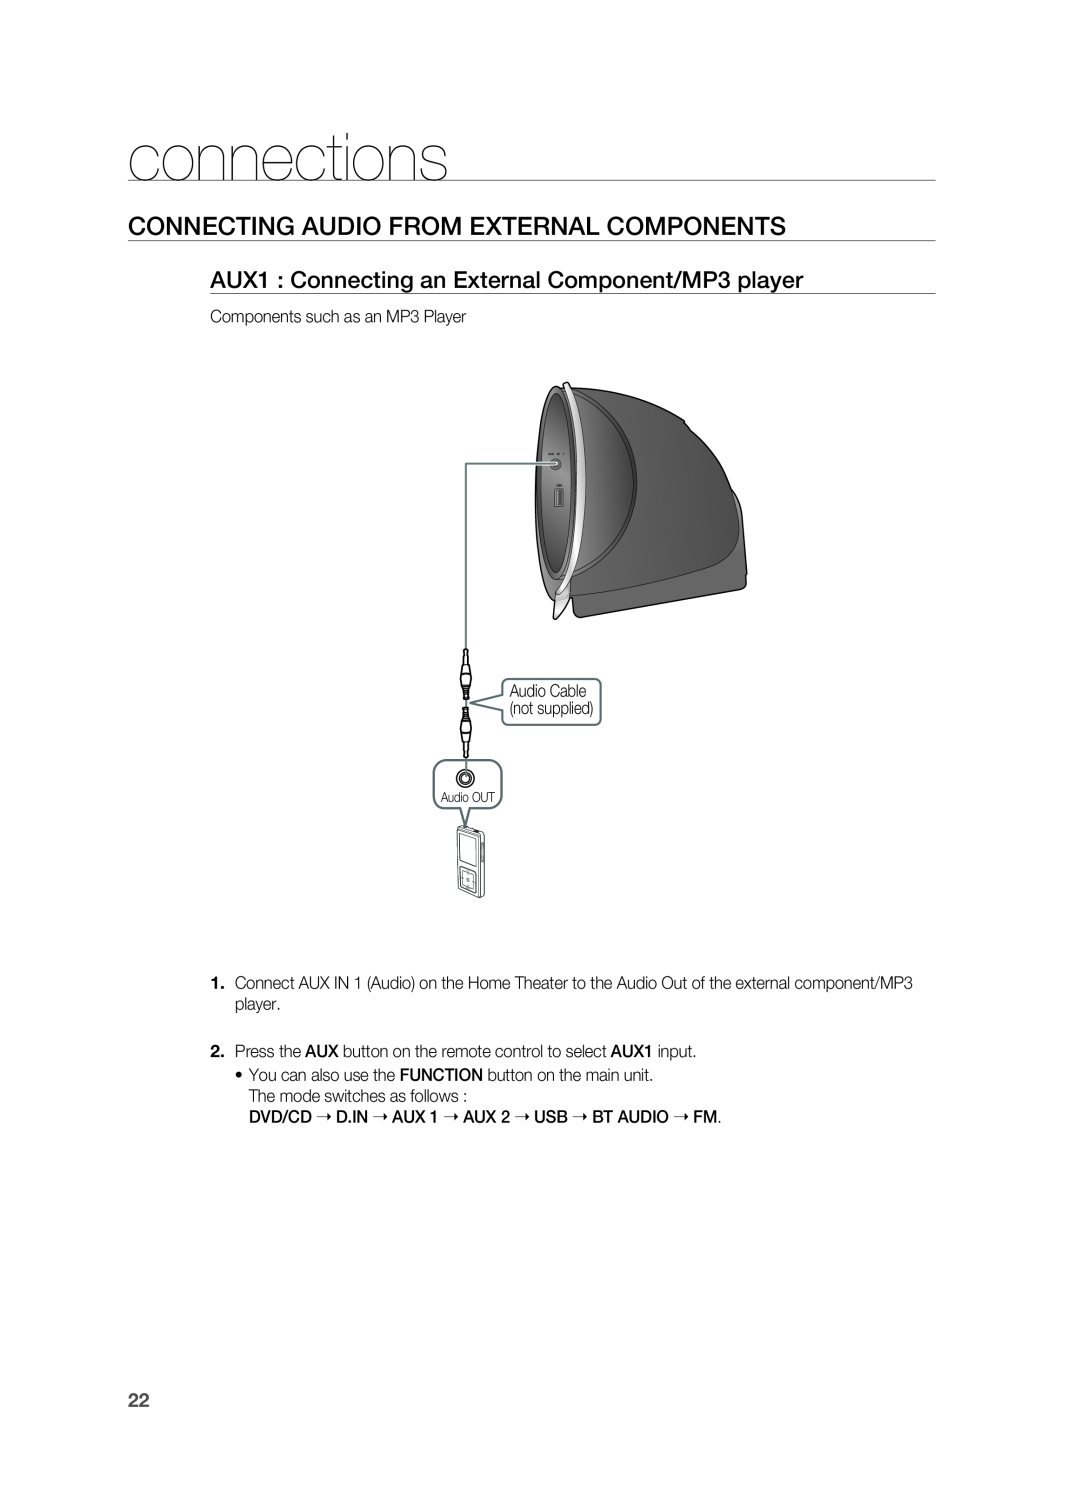 Samsung HT-X810 user manual CONNECTING AUDIO FrOM EXTErNAl COMPONENTS, connections 